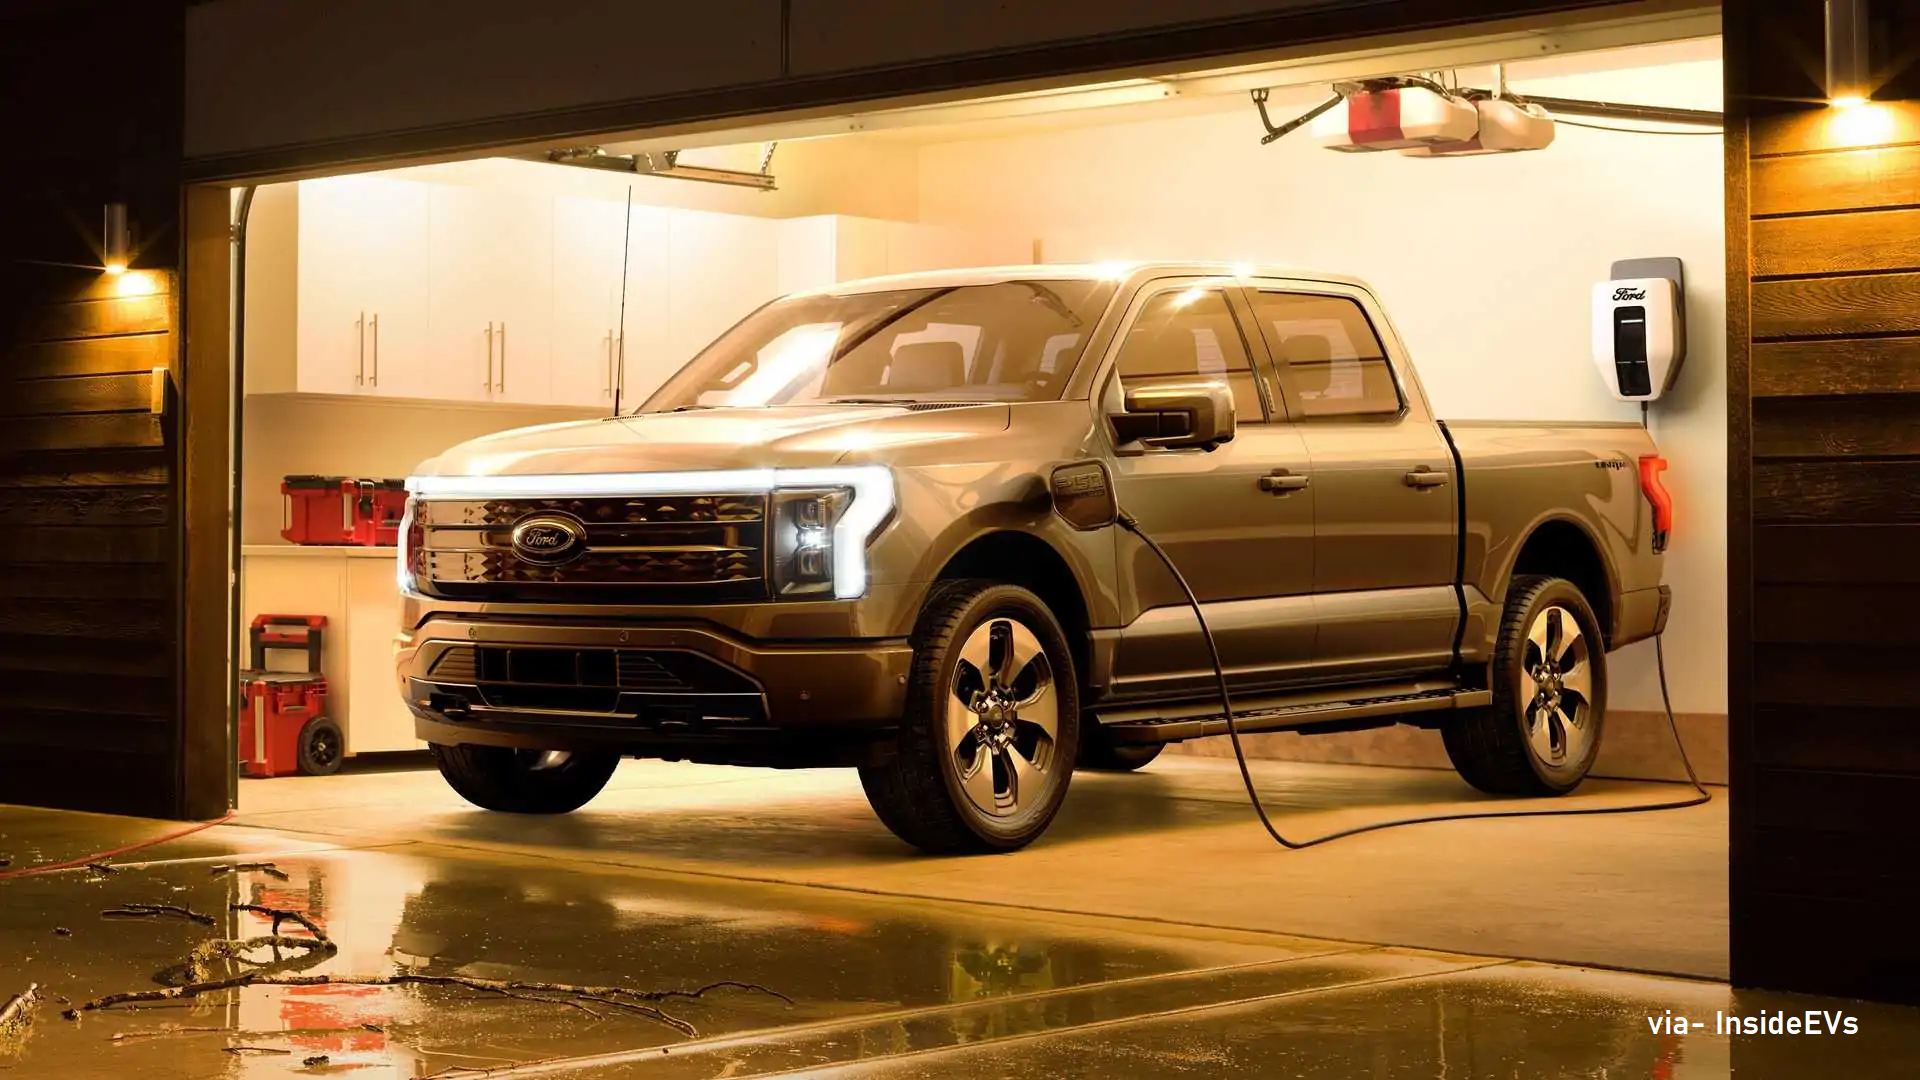 Ford's F-150 Lightning EV Truck being charged in night time